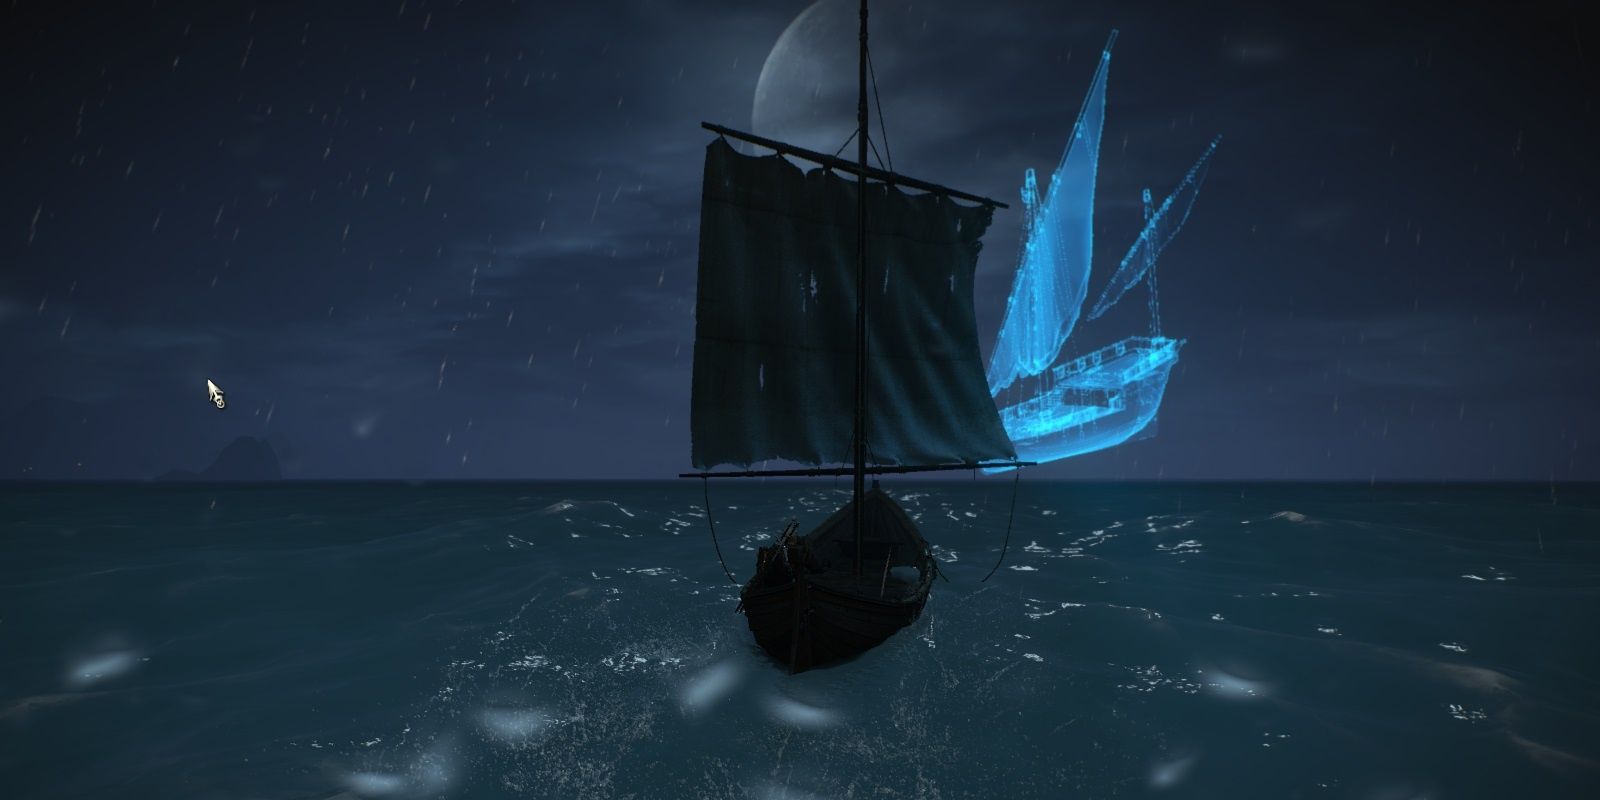 witcher 3 ghost ship appears during a night time voyage